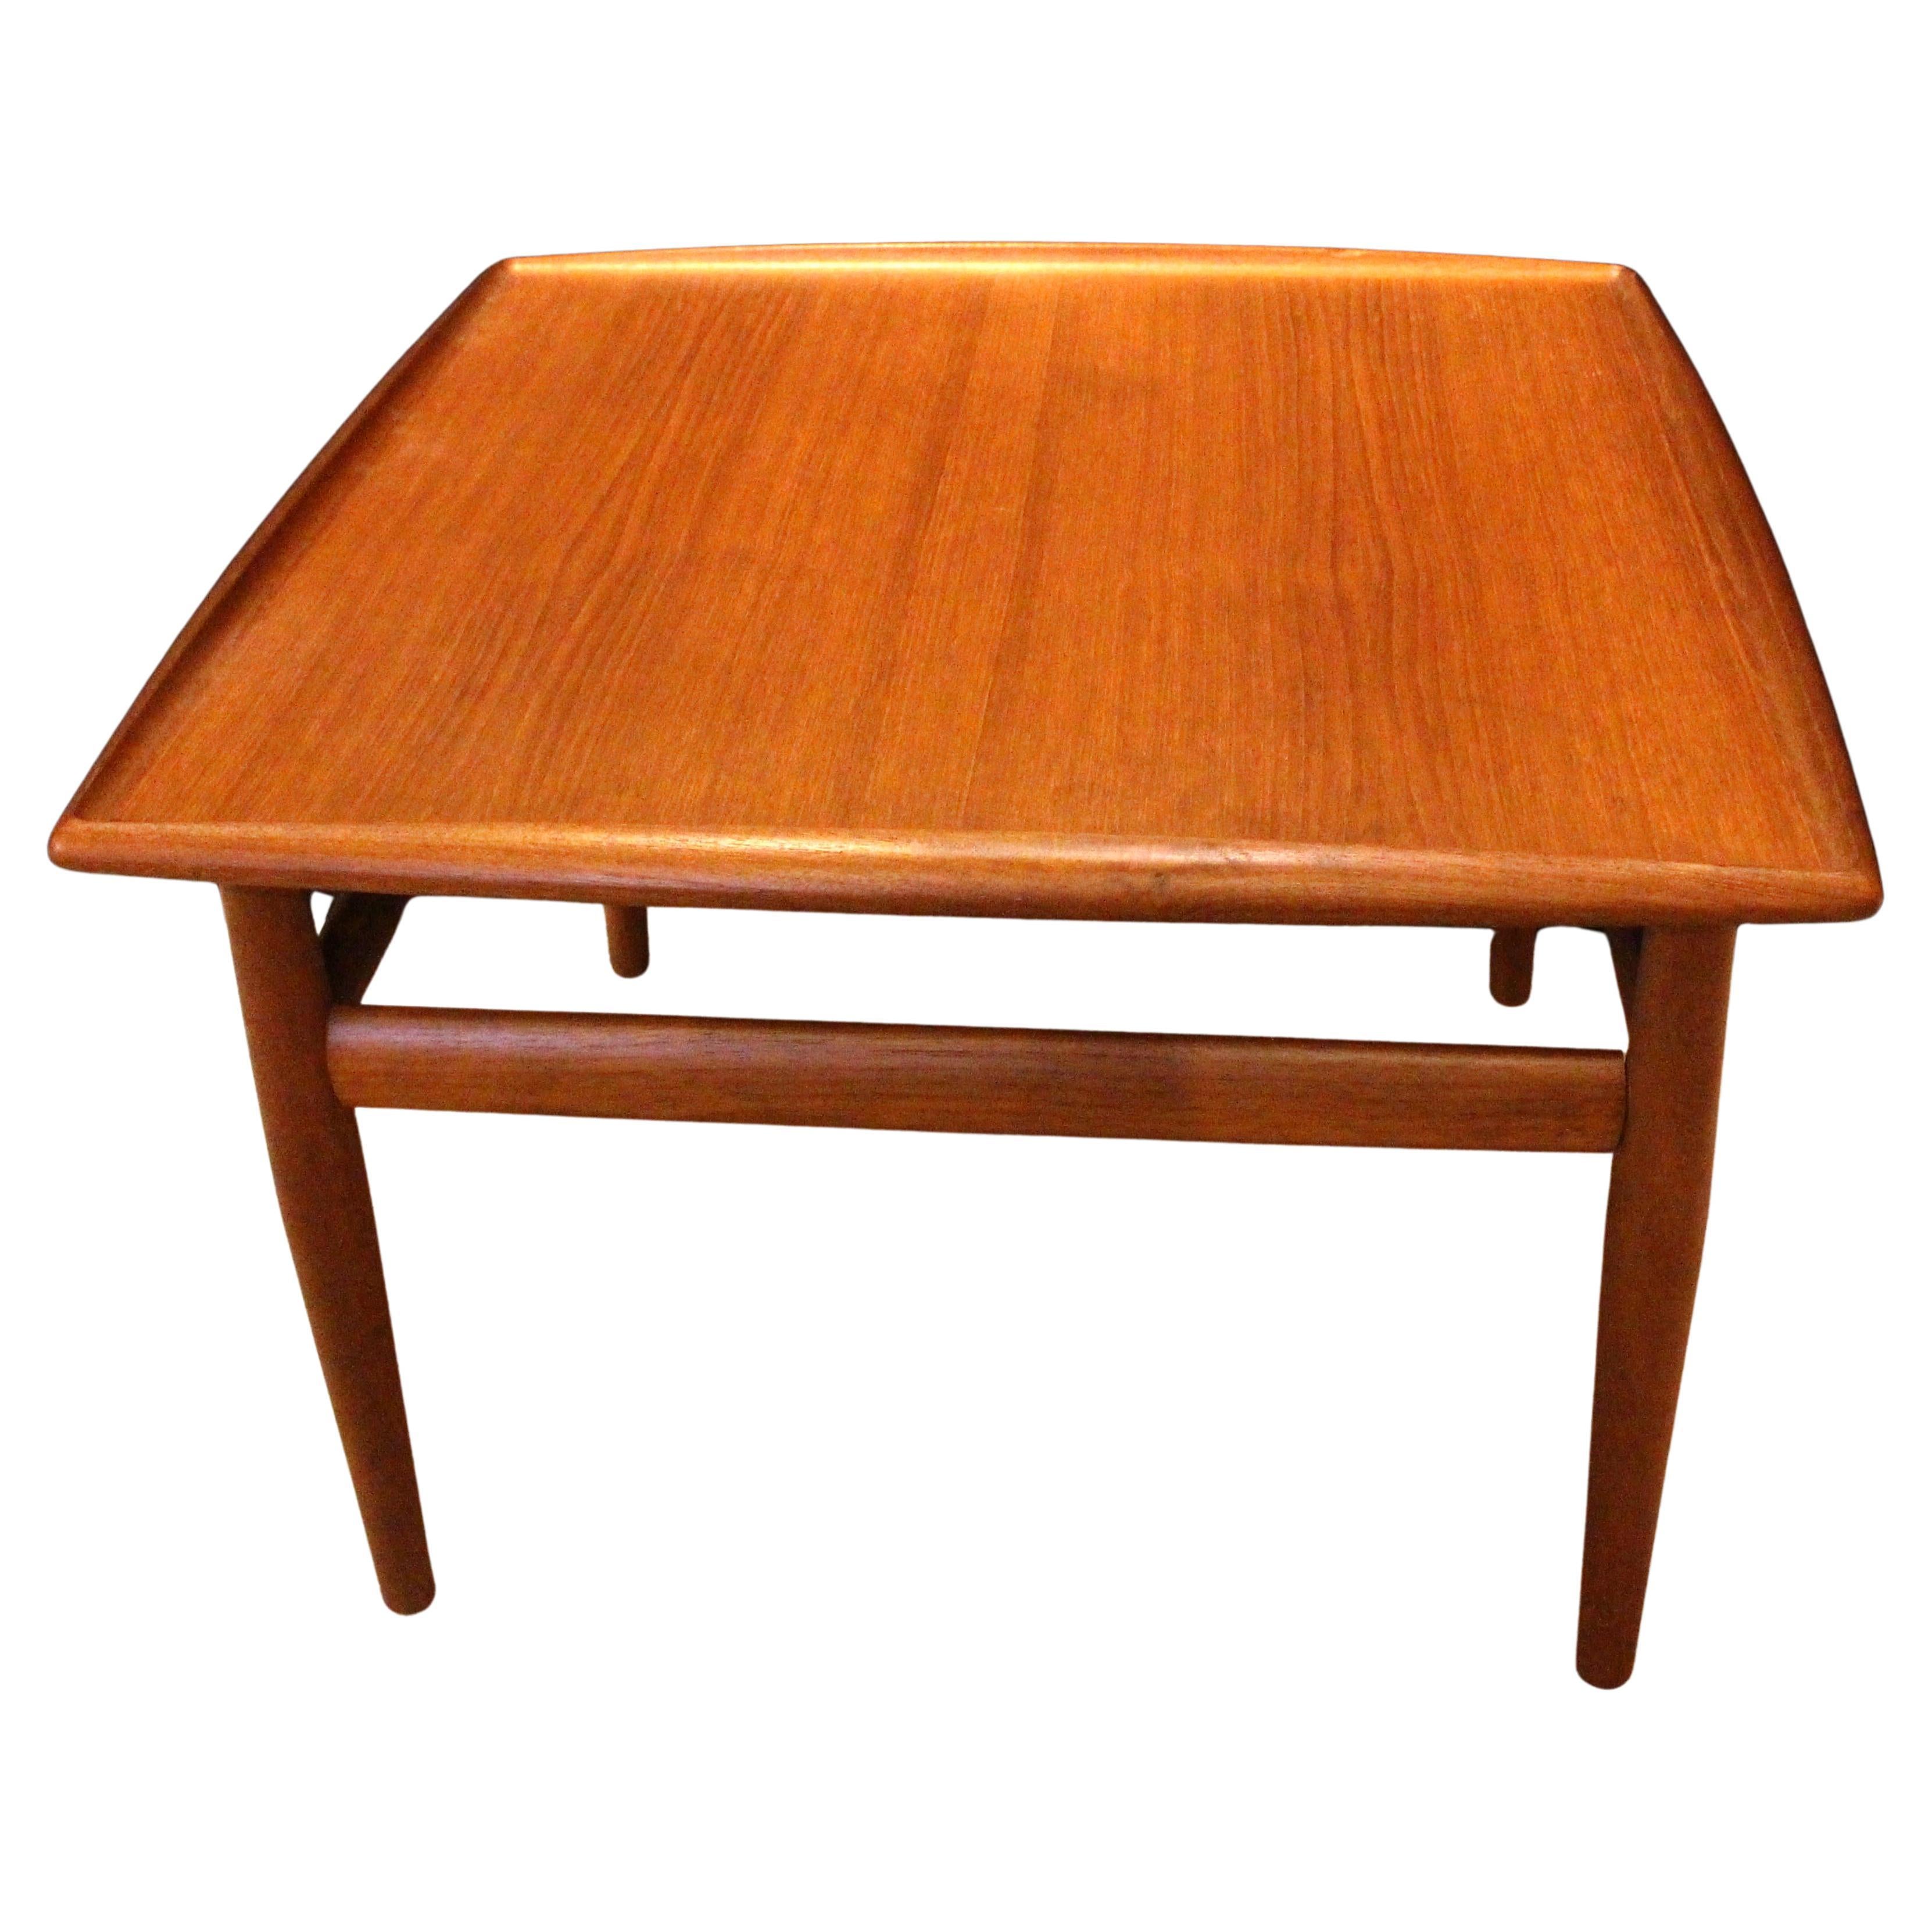 Mid Century Modern Square Side or Coffee Table, c.1960s. Designed by Greta Jalk  For Sale